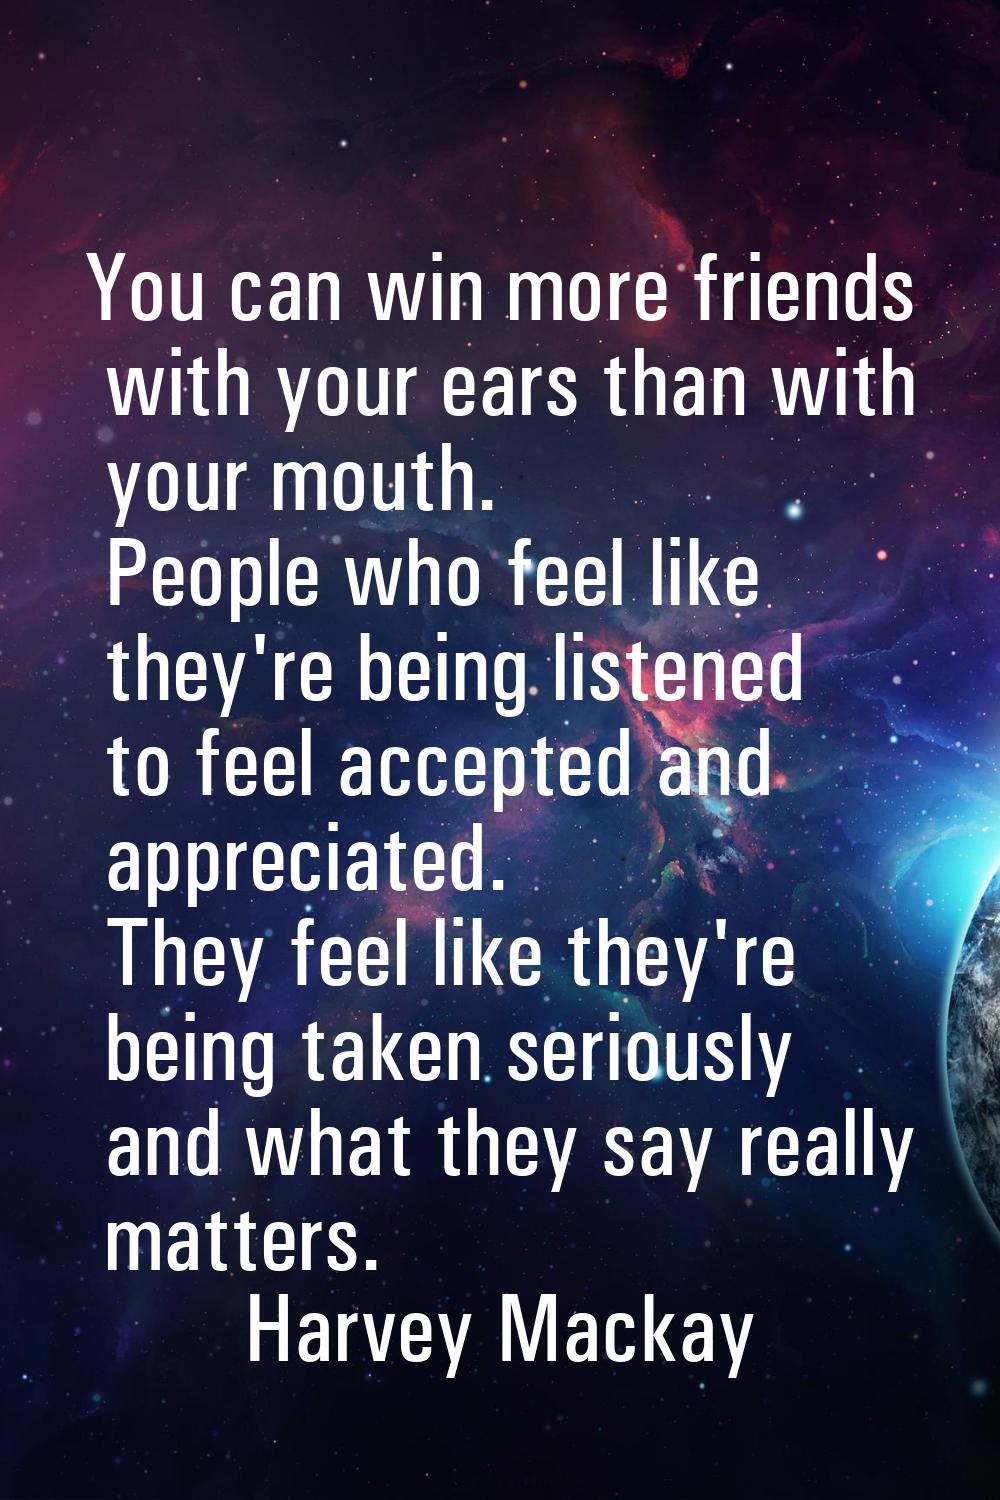 You can win more friends with your ears than with your mouth. People who feel like they're being li